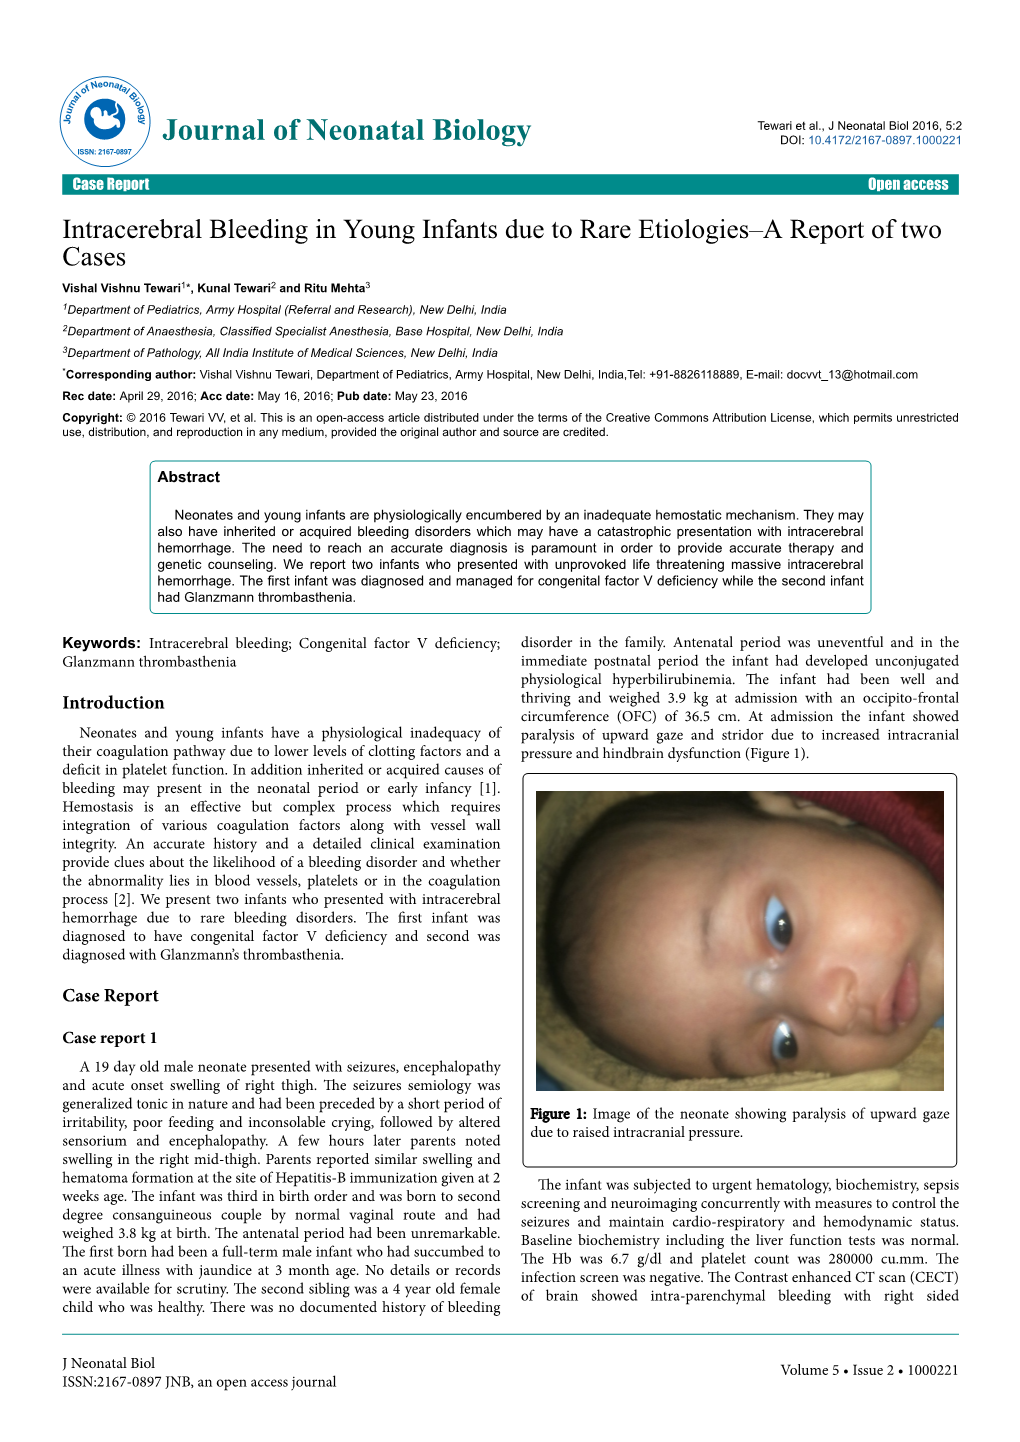 Intracerebral Bleeding in Young Infants Due to Rare Etiologies–A